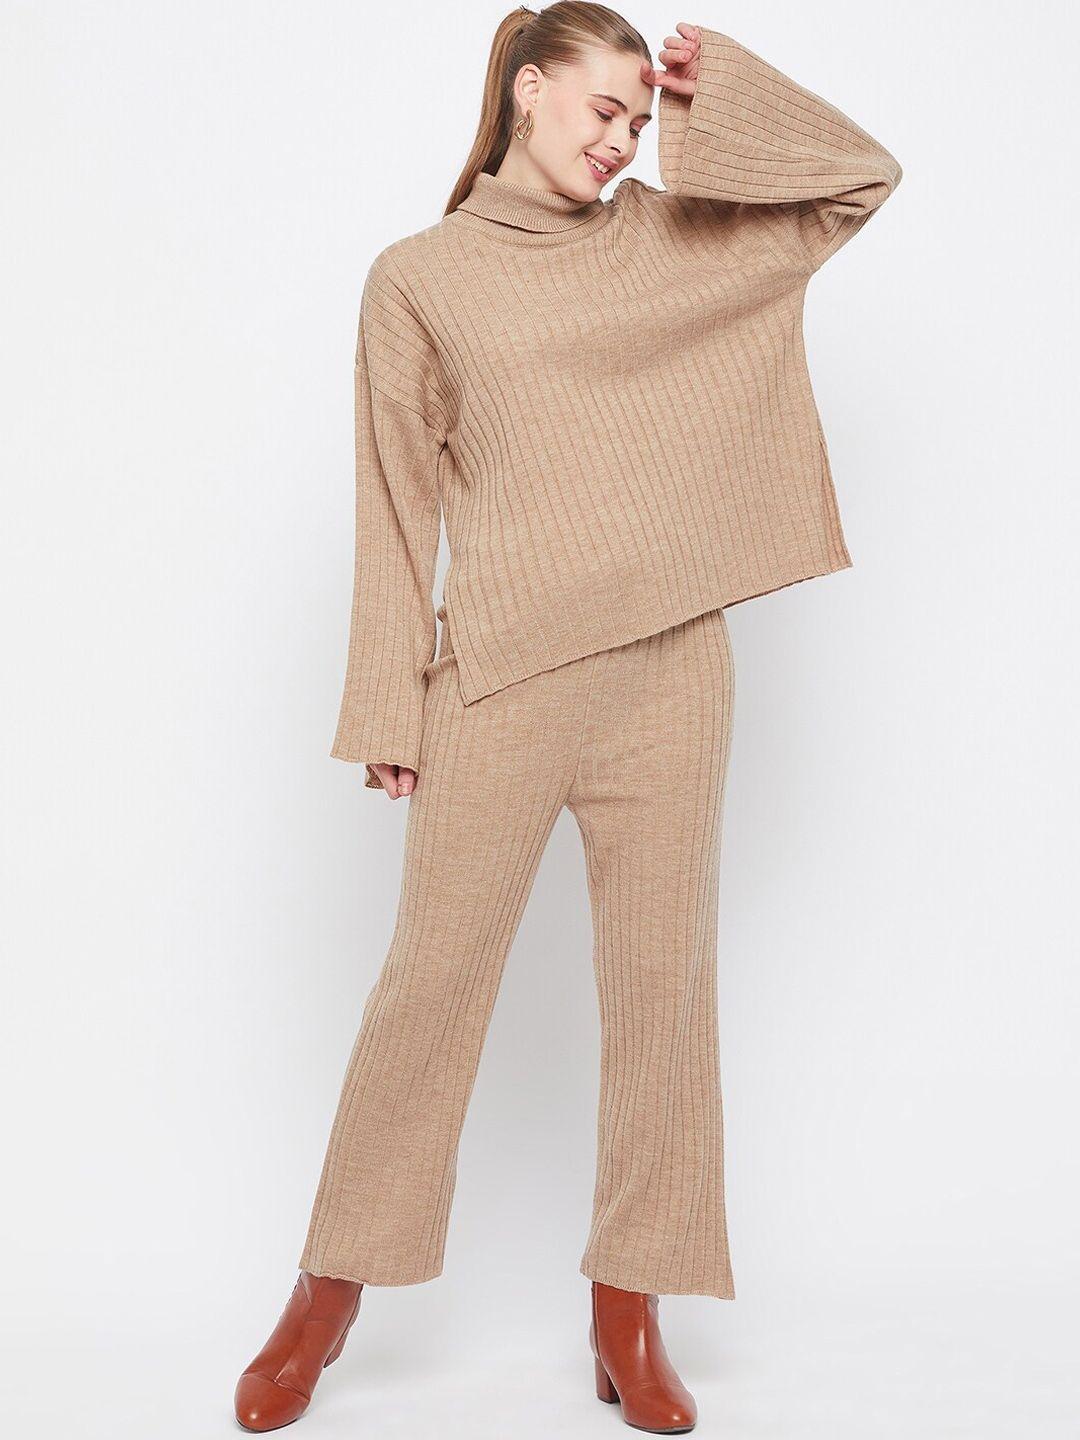 club york striped high neck sweater with trousers co-ords